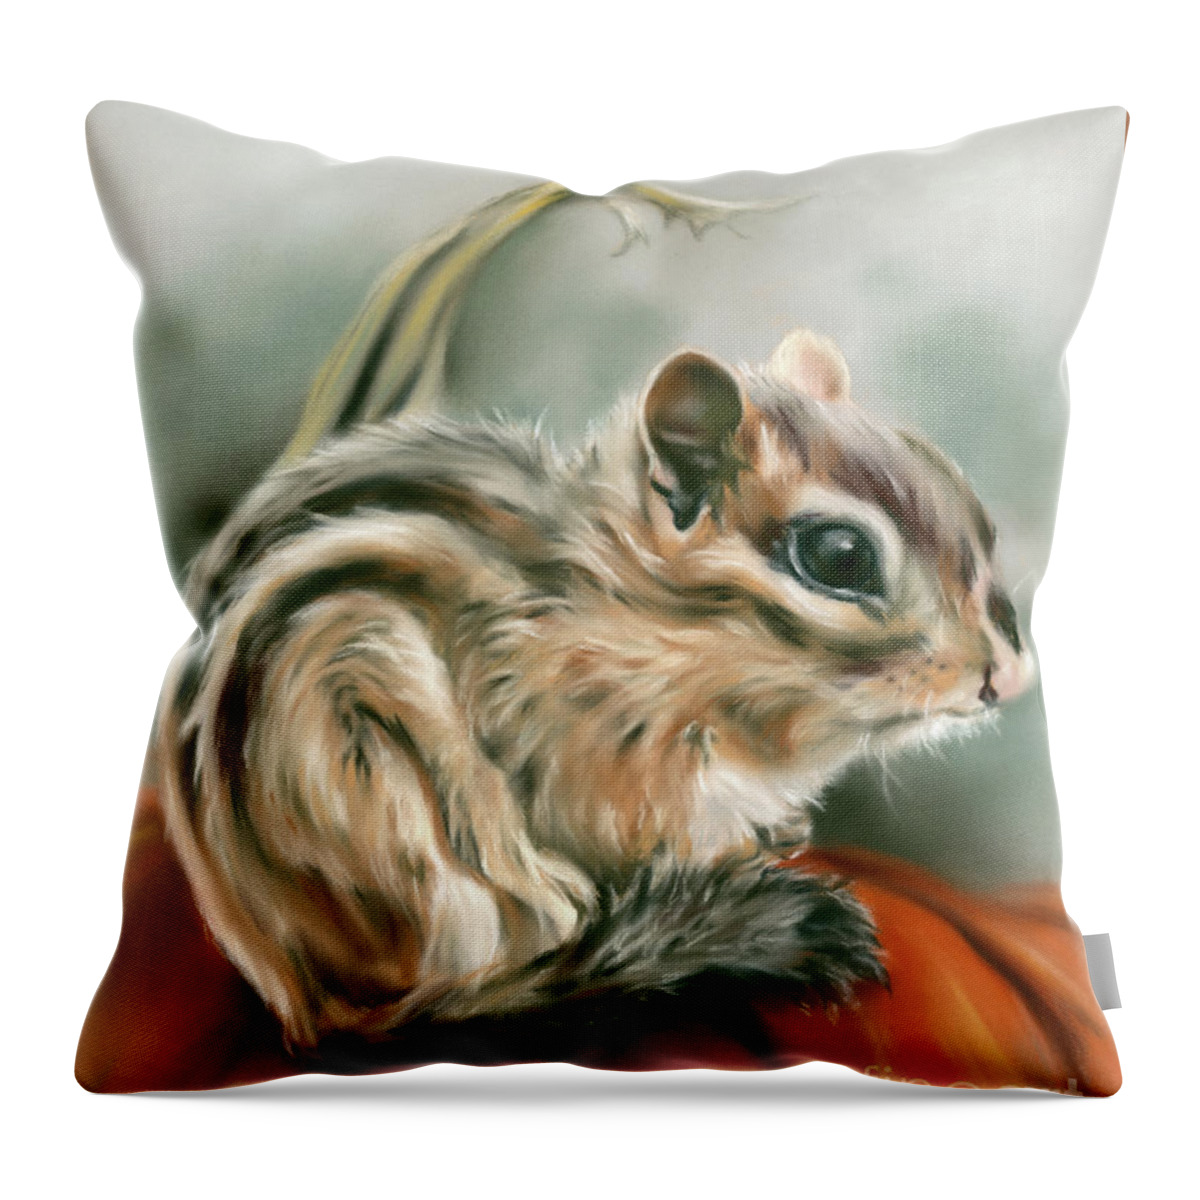 Animal Throw Pillow featuring the painting Chipmunk Sitting on a Pumpkin by MM Anderson